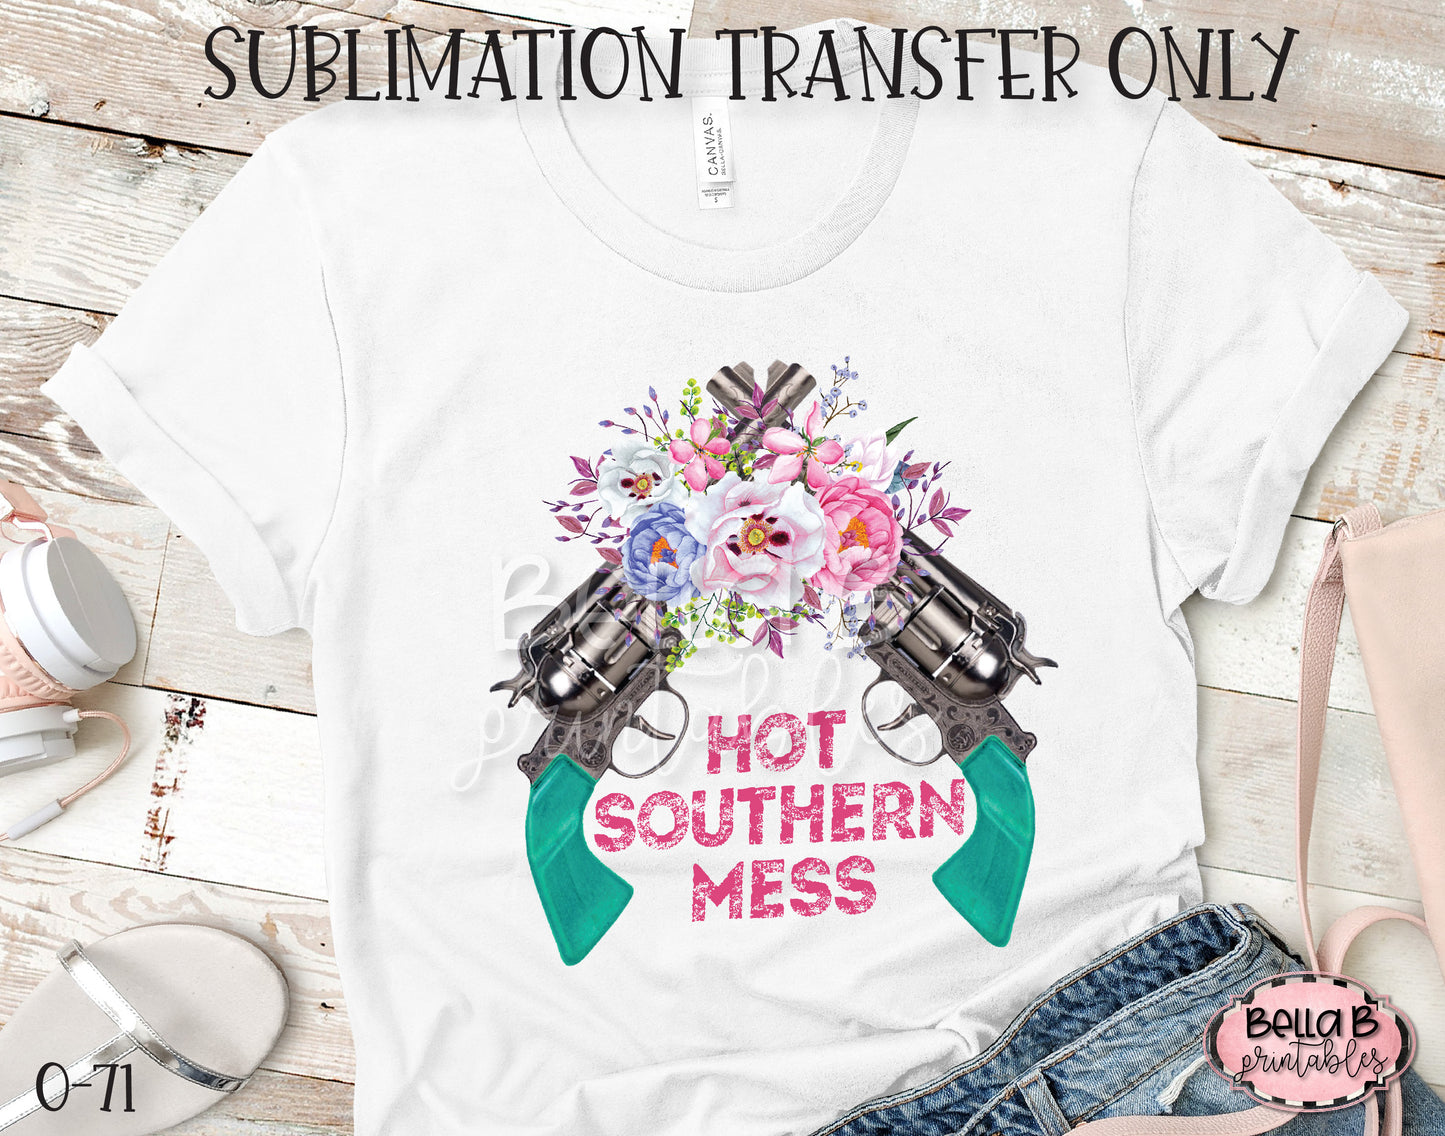 Hot Southern Mess Sublimation Transfer, Ready To Press, Heat Press Transfer, Sublimation Print